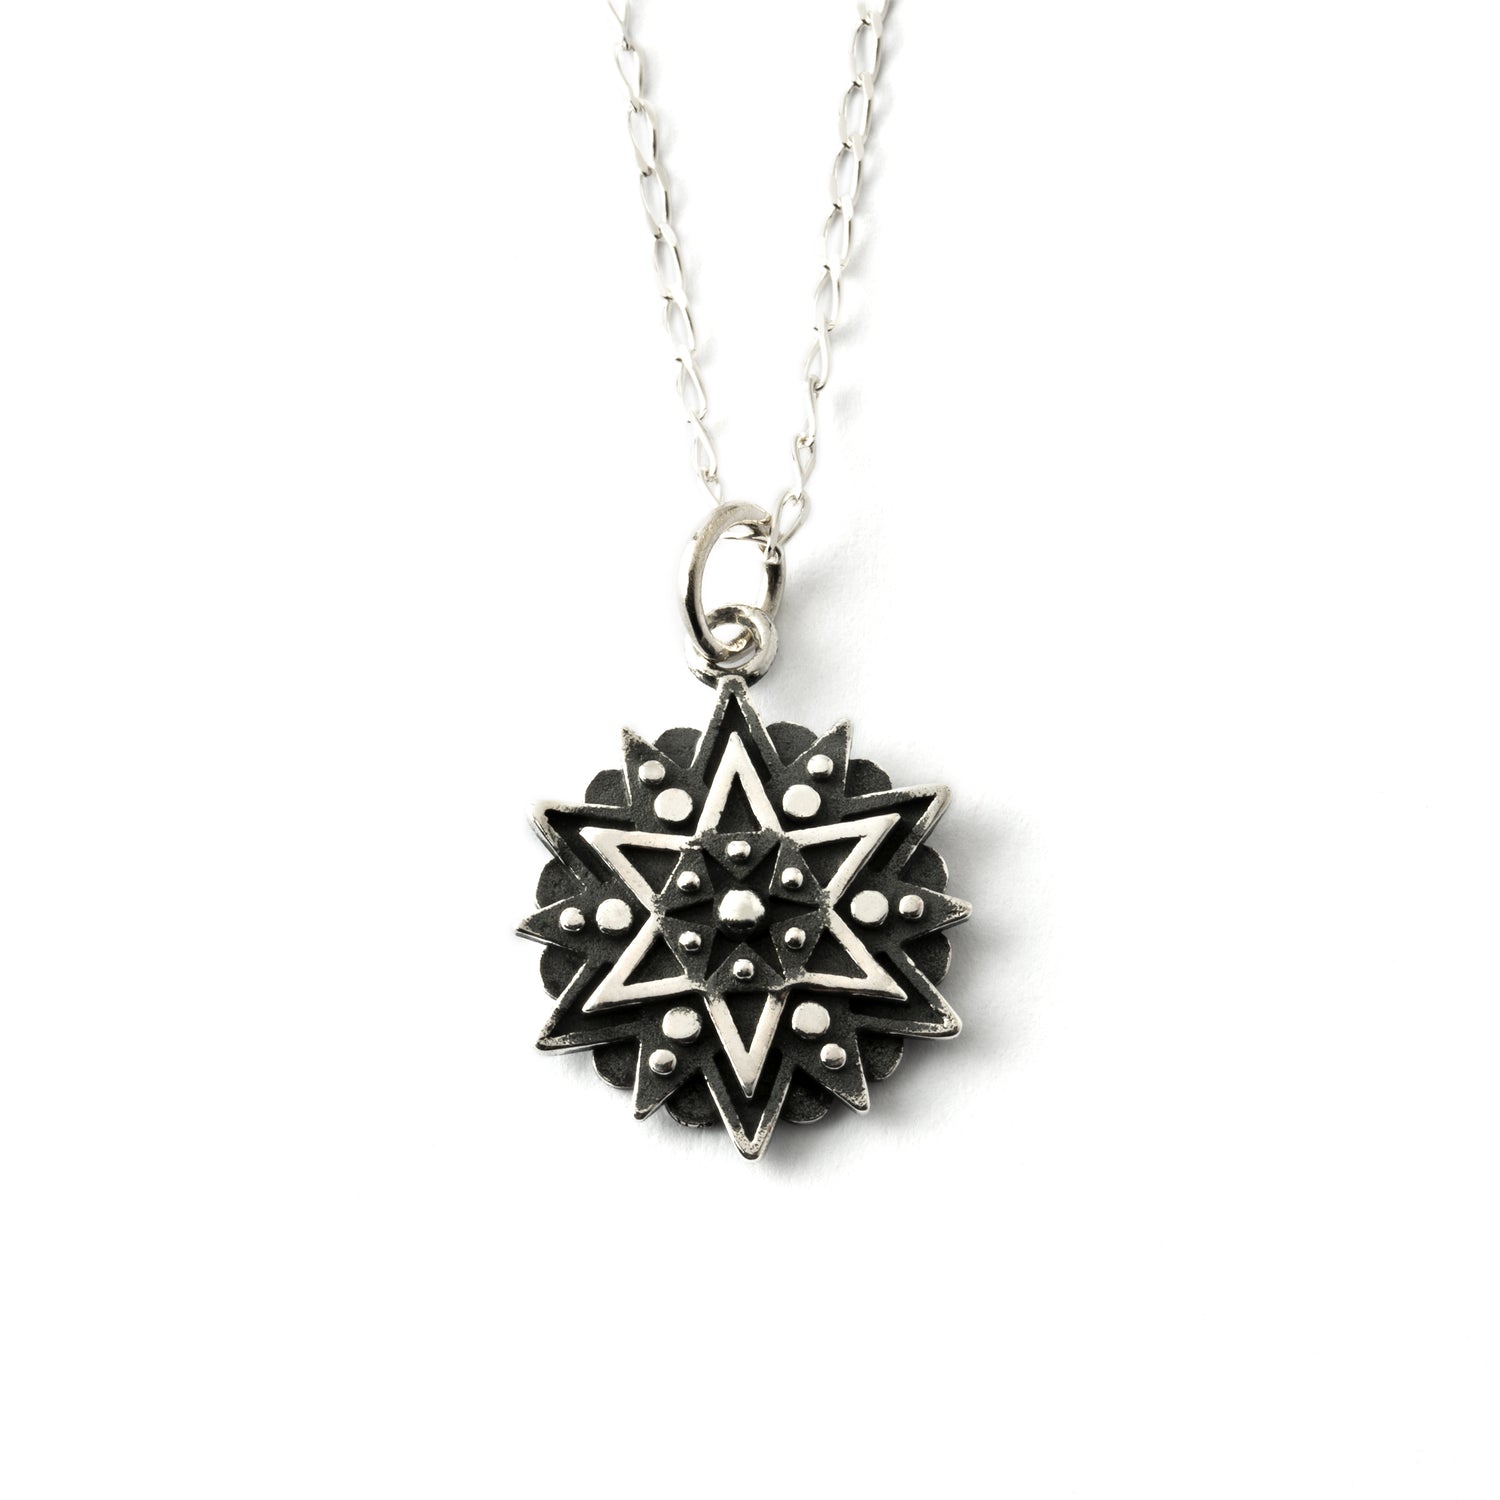 Inspiration Star Charm necklace frontal view